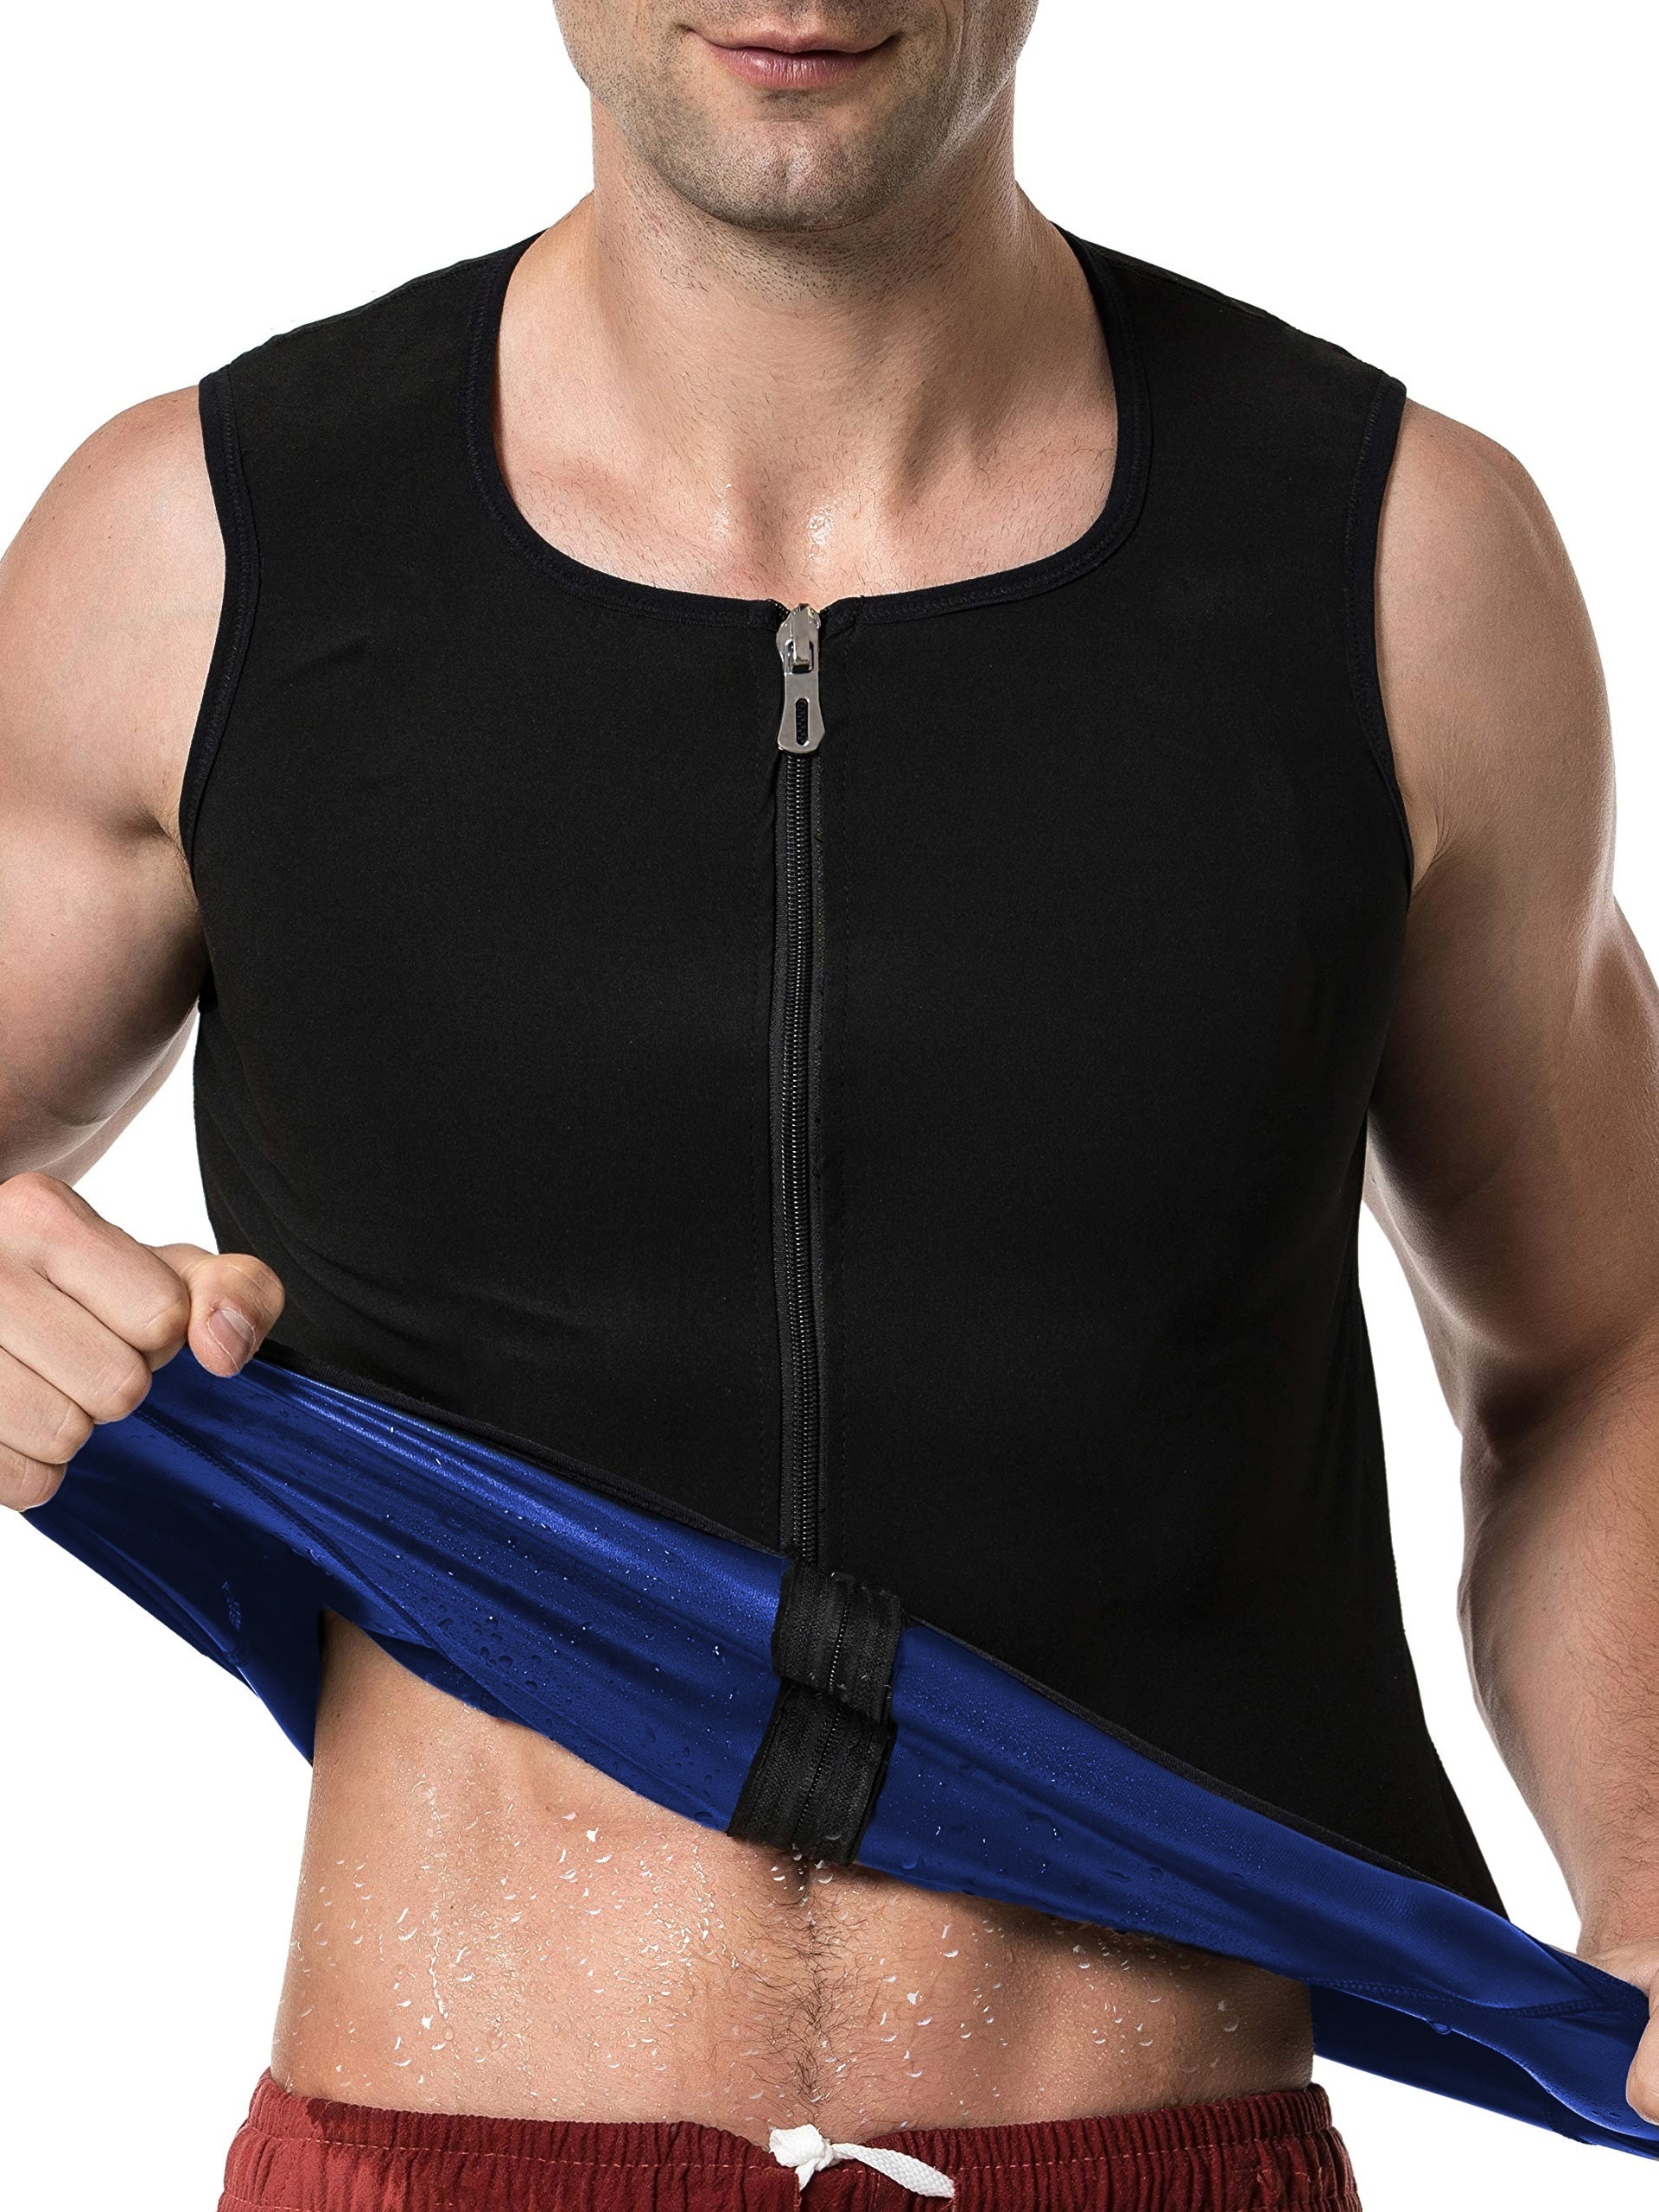 Men's Compression Sweat Sauna Vest: Moisture Wicking, High Stretch Body  Shaper with Back Support & Zip Up Tank Top for Workout & Fitness Gym